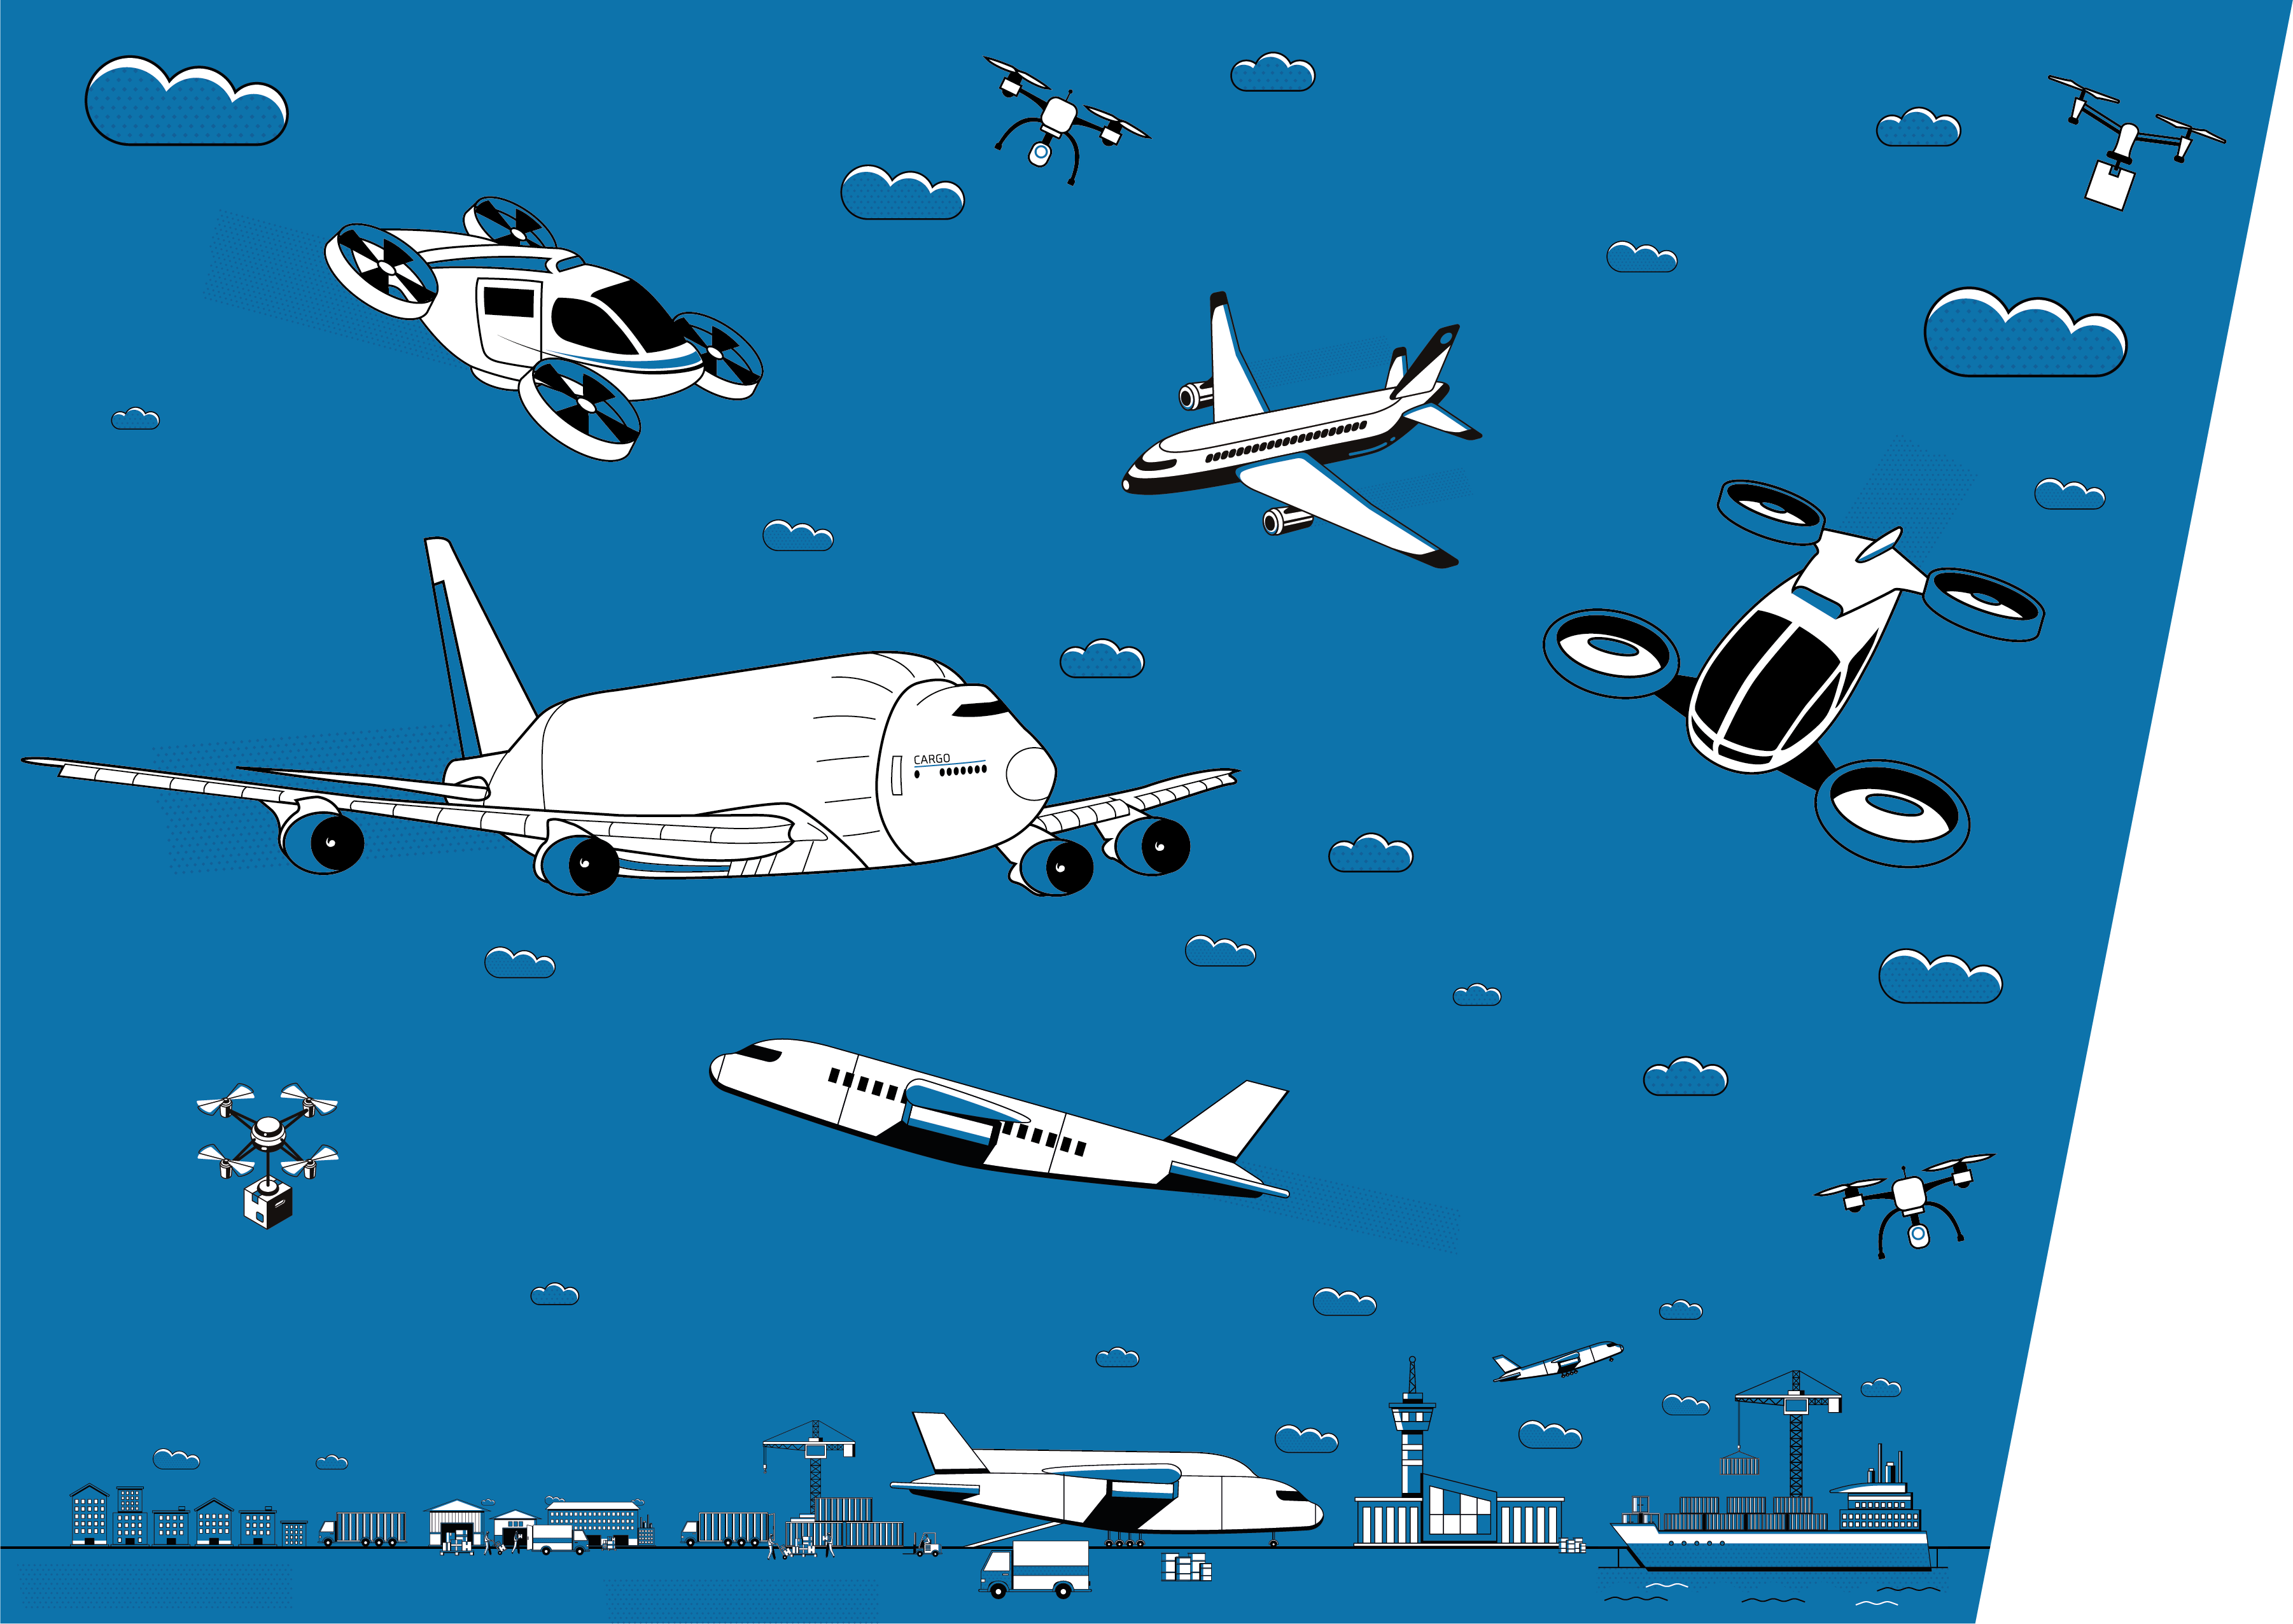 Airplanes and other modes of transportation